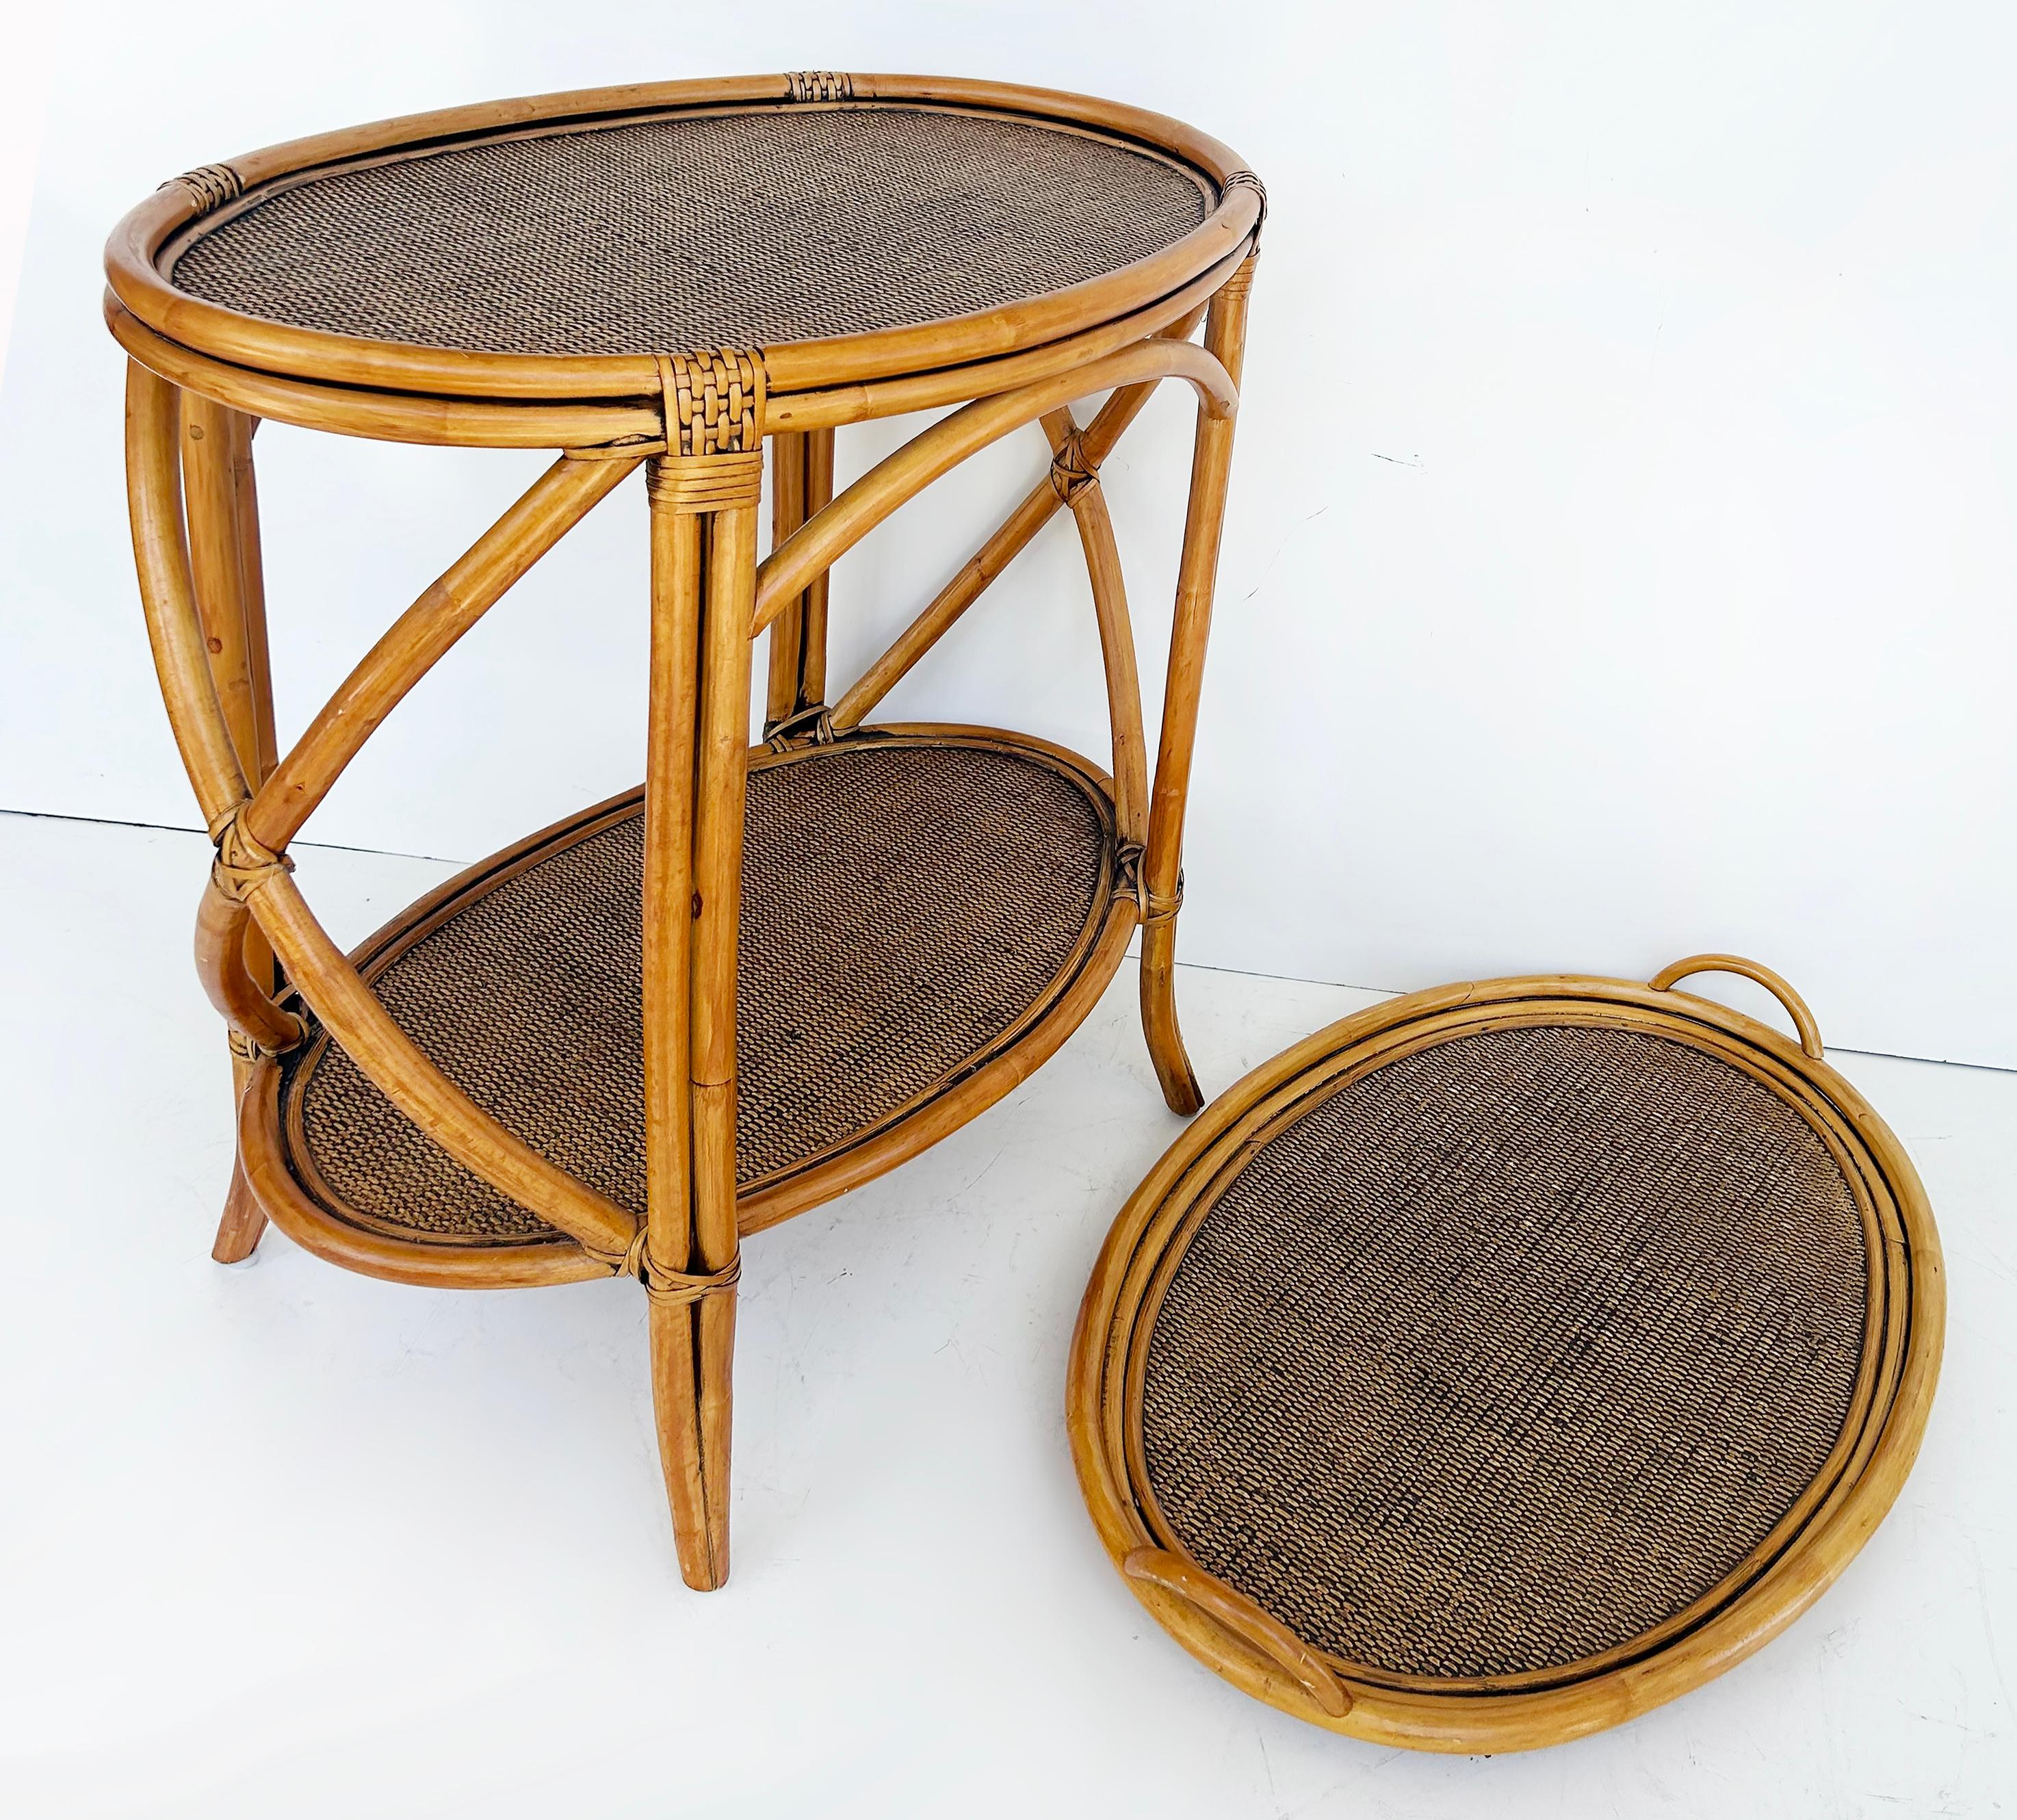 Rattan and Woven Grasscloth Oval Removable Tray Top Table 

Offered for sale is a rattan and woven grasscloth oval tray table with a removable tray top with handles. The table has gracefully curved legs with a grasscloth-covered top and lower shelf.